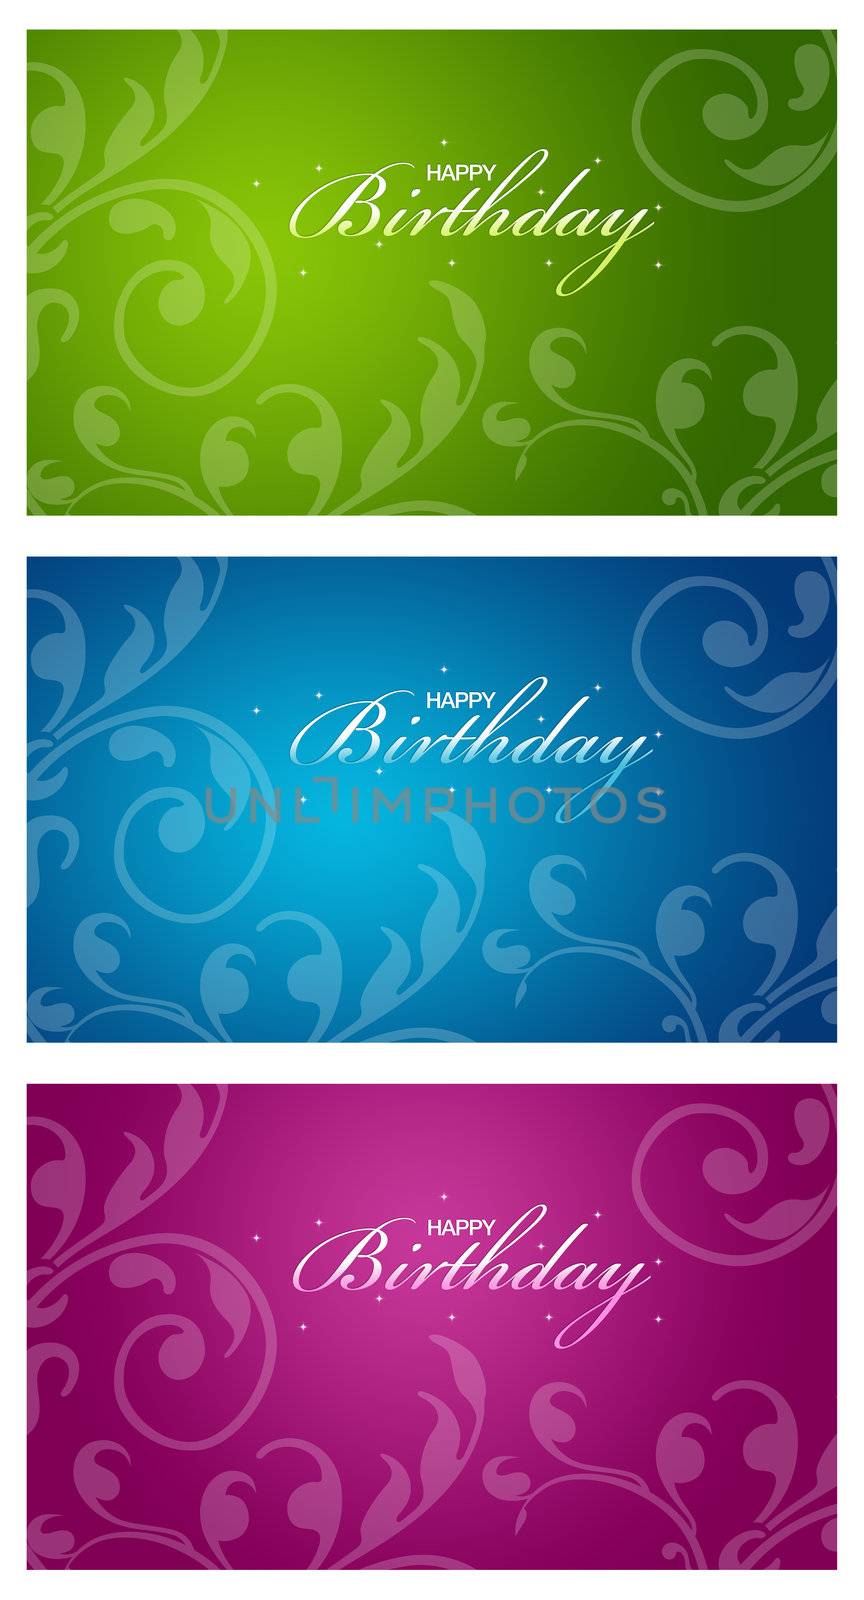 A series of colorful birthday cards with floral elements.